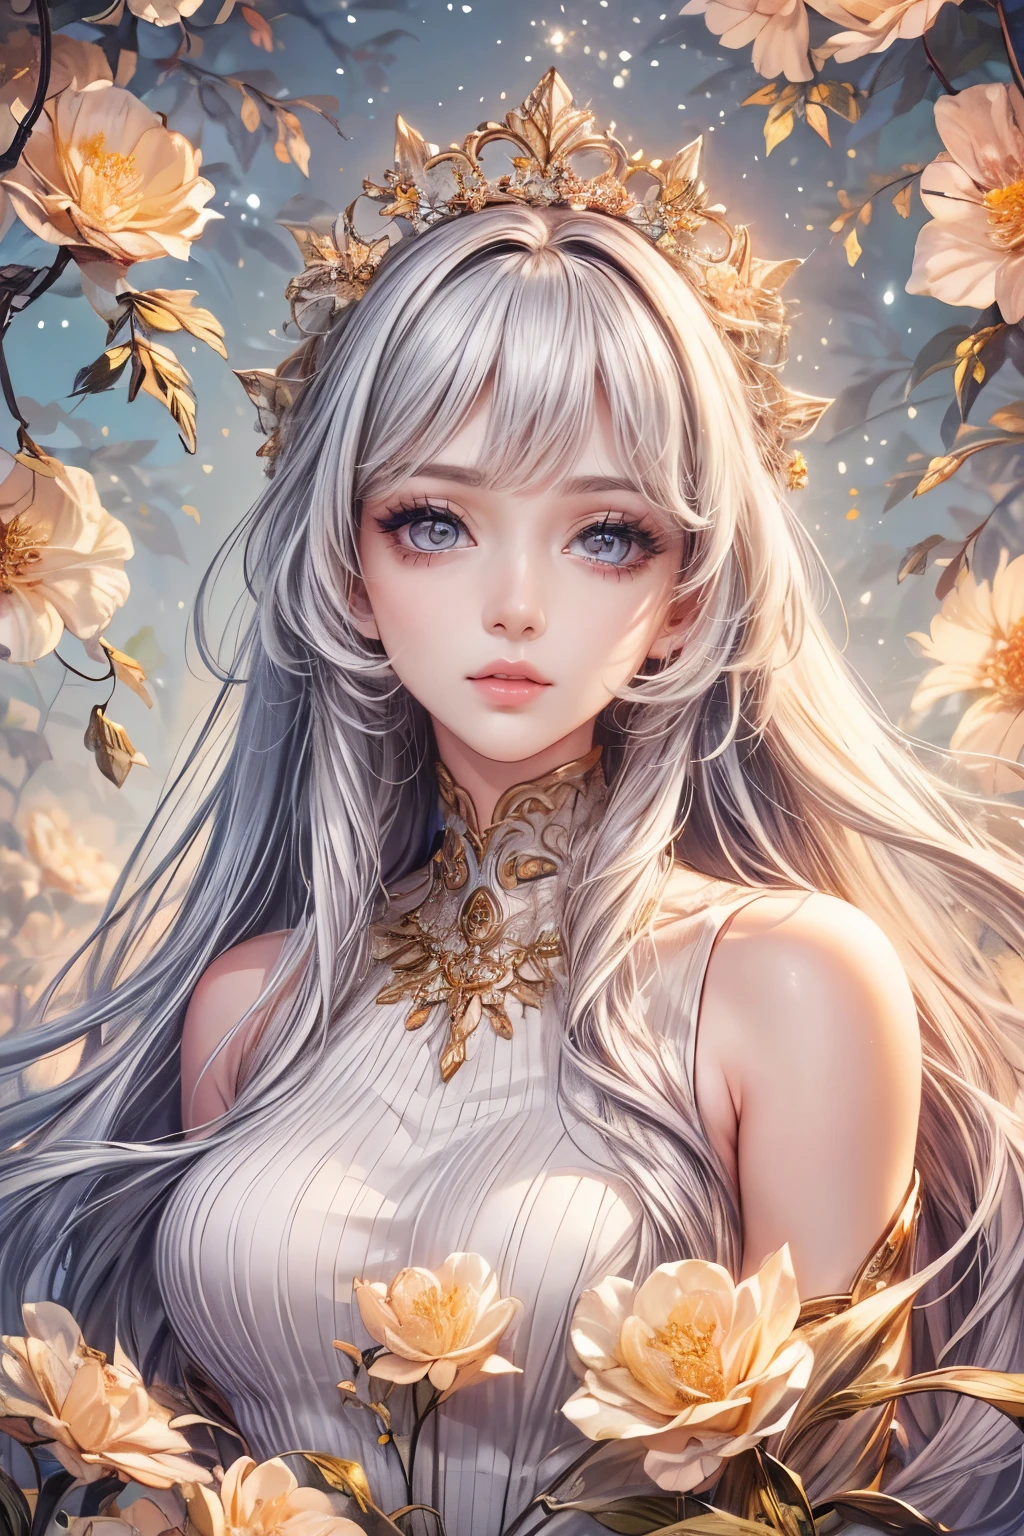 (best quality,8K,CG),detailed upper body, girl,floral forest background,complex facial features,elegant long curly hair,almond-shaped big eyes,detailed eye makeup,long eyelashes,twinkling stars,exquisite lip details,soft and harmonious style.